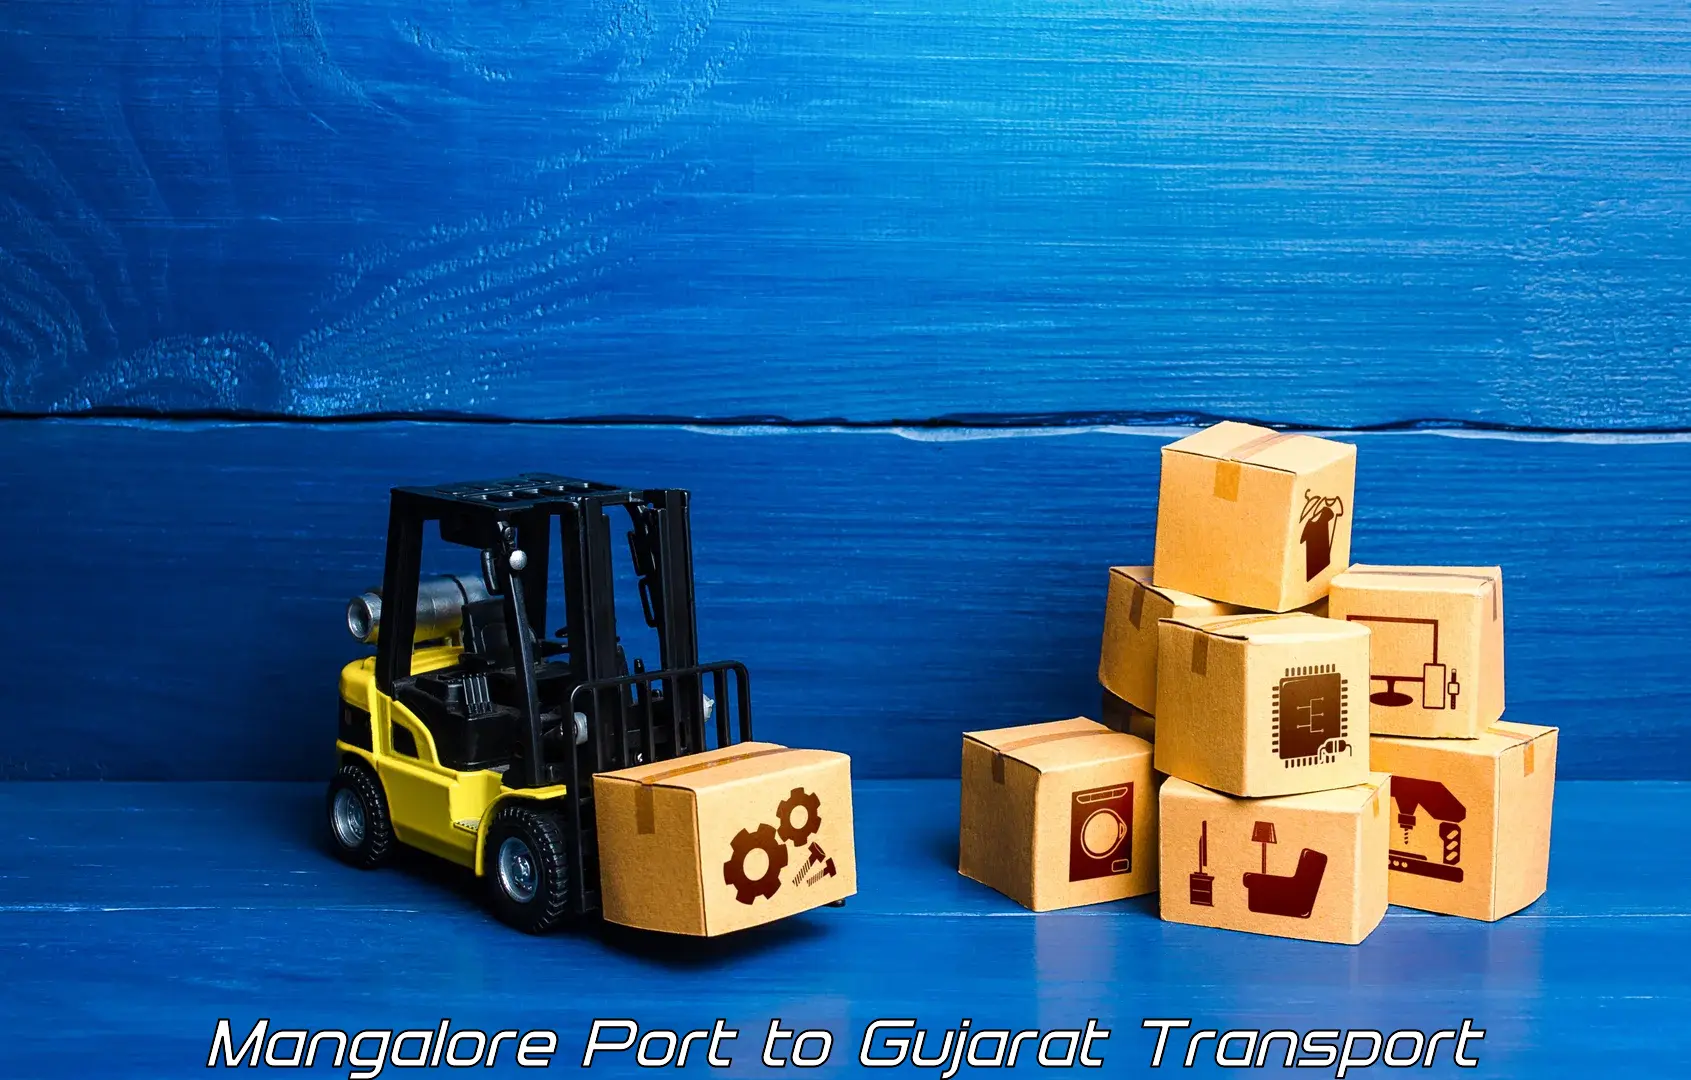 Transport in sharing in Mangalore Port to Lunawada